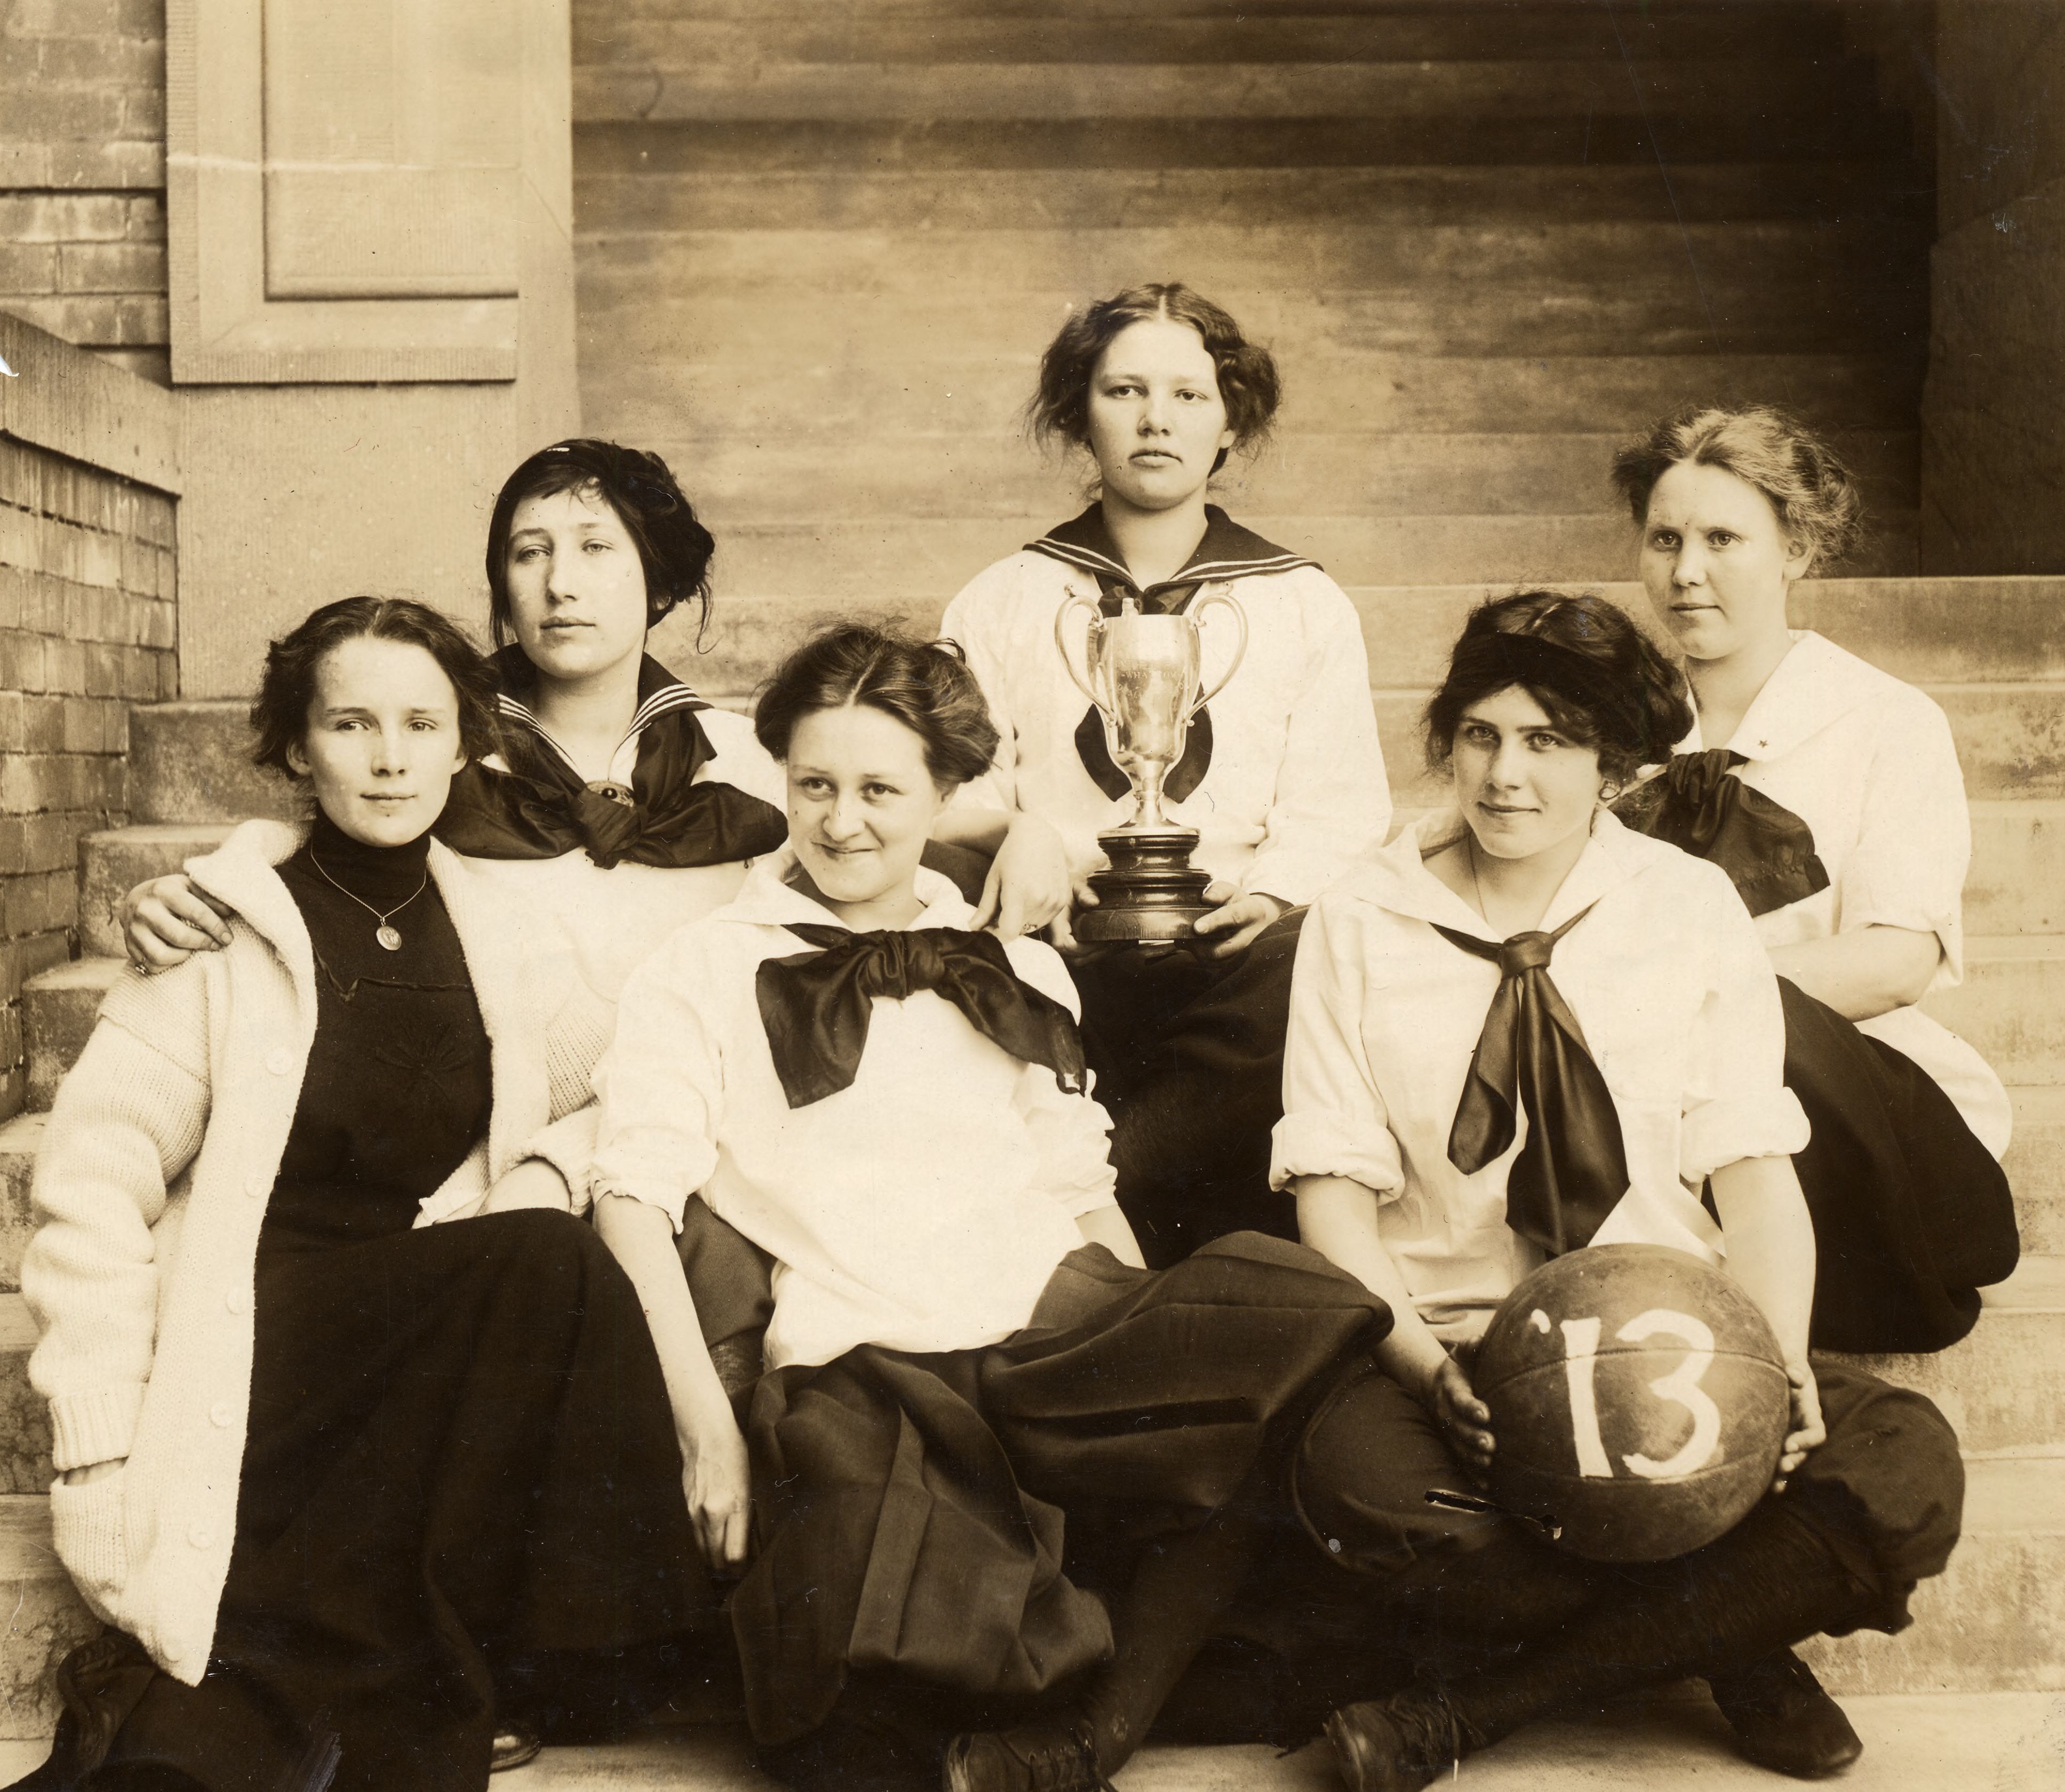 Six students sit on the steps of Old Main in 1913, displaying a trophy cup and a basketball.